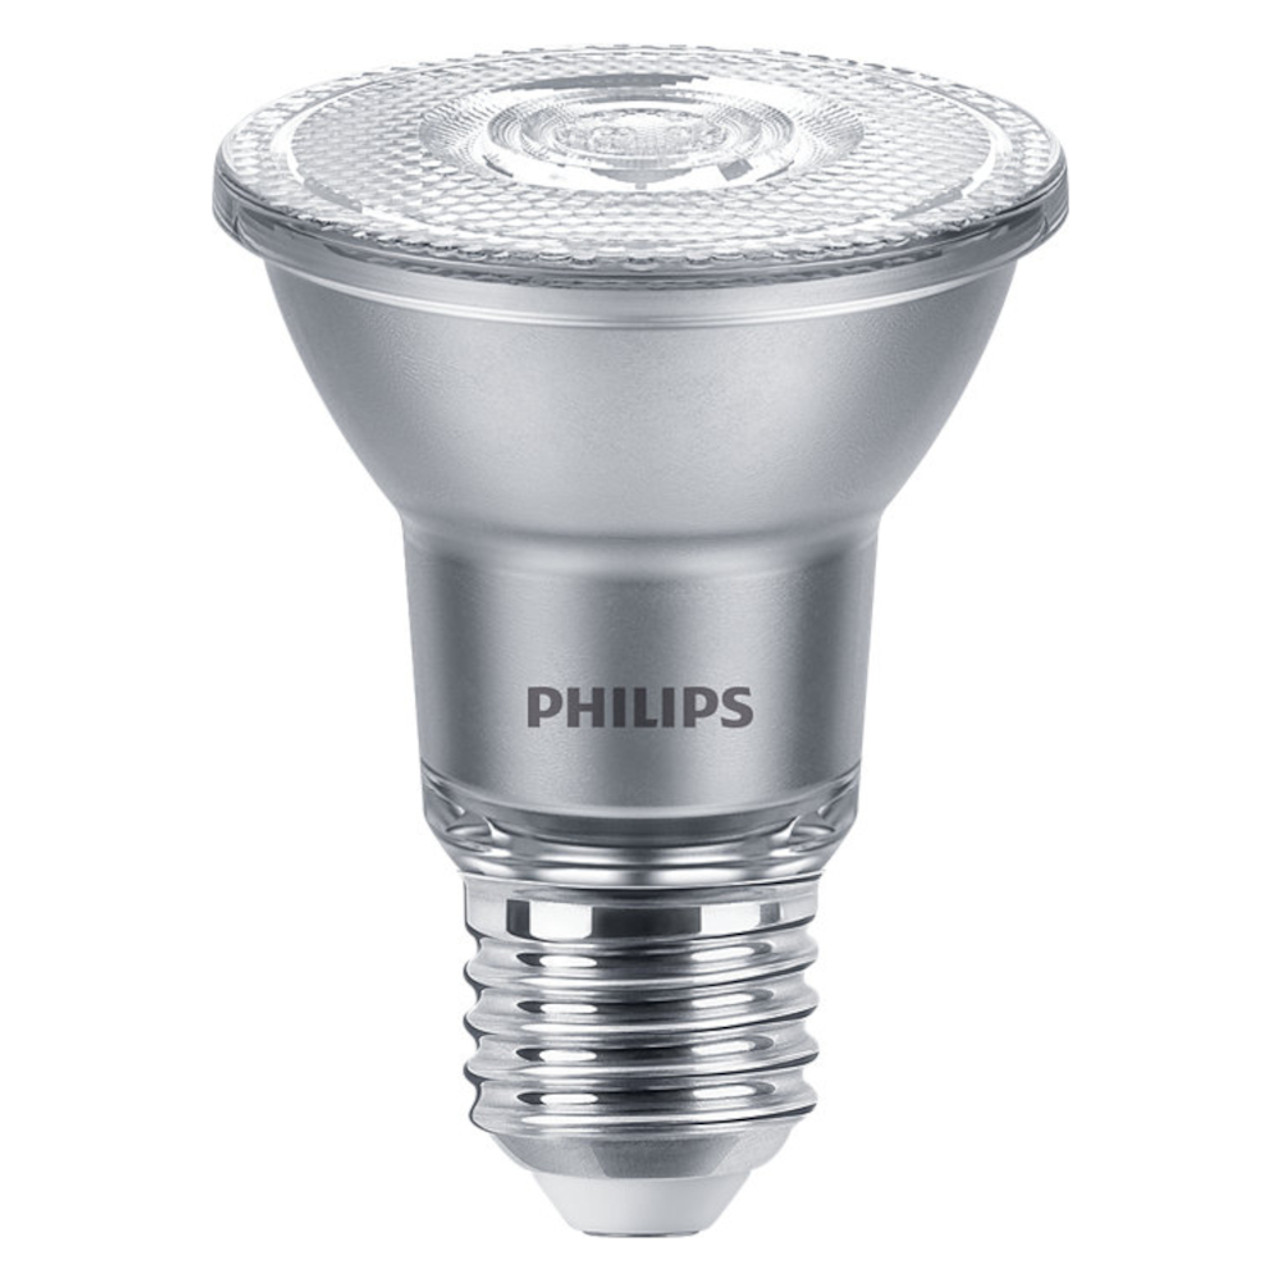 Philips LED Par20 6W (50W) Cool White 25 Degrees RA90 Dimmable